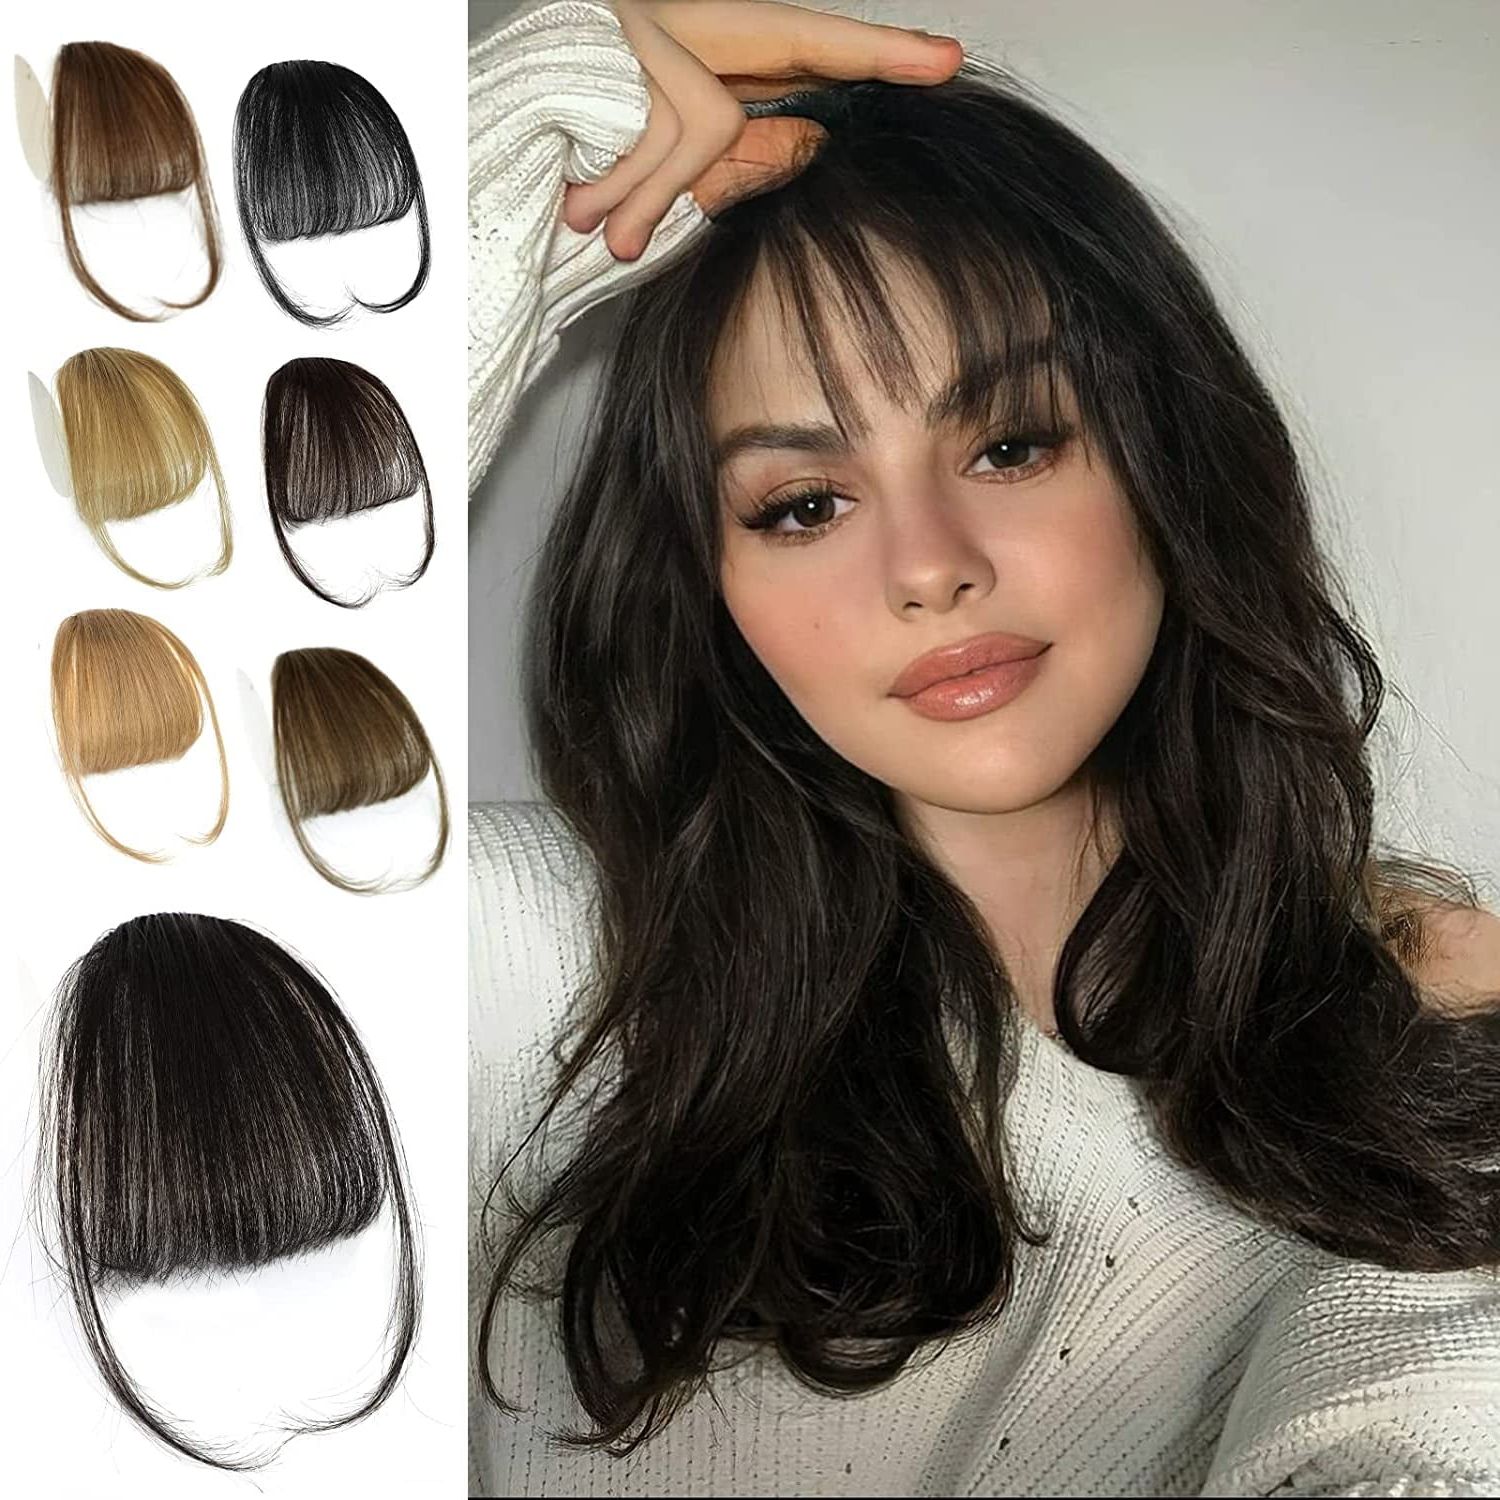 [%well Known Wispy Bangs For Medium Hair With Regard To Ustar Clip In Bangs – 100% Human Hair Wispy Bangs Clip In Hair Extensions,  Brown Black Color #1b Air Bangs Fringe With Temples Hairpieces For Women  Curved Bangs For Daily Wear – Walmart|ustar Clip In Bangs – 100% Human Hair Wispy Bangs Clip In Hair Extensions,  Brown Black Color #1b Air Bangs Fringe With Temples Hairpieces For Women  Curved Bangs For Daily Wear – Walmart Inside Well Known Wispy Bangs For Medium Hair%] (View 18 of 20)